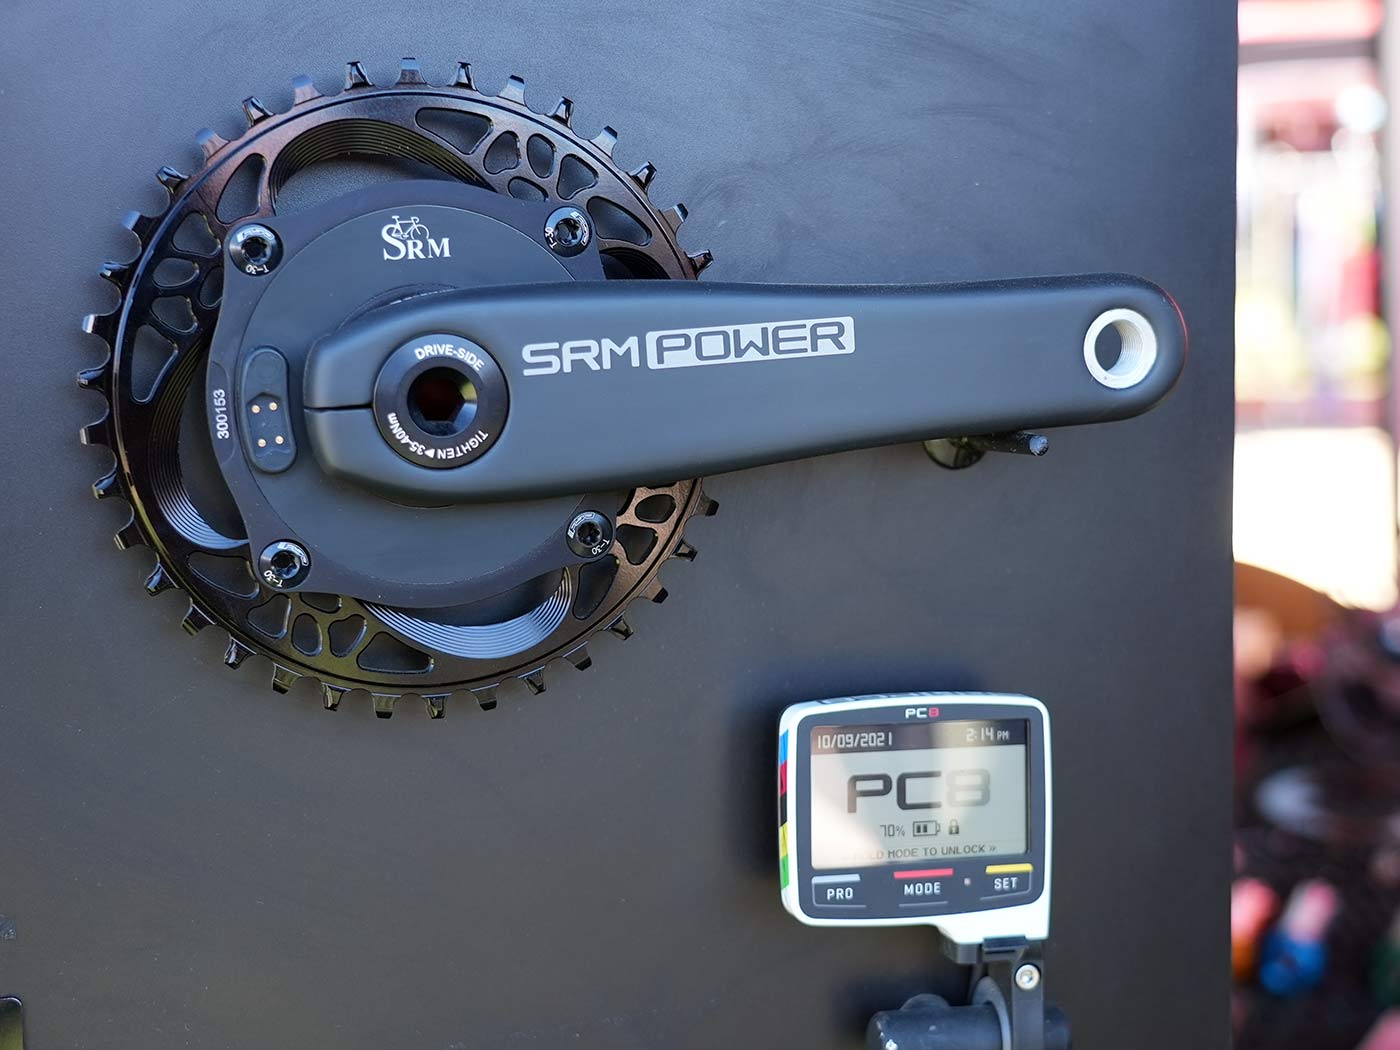 srm pm9 crank spider power meter for road and mountain bikes